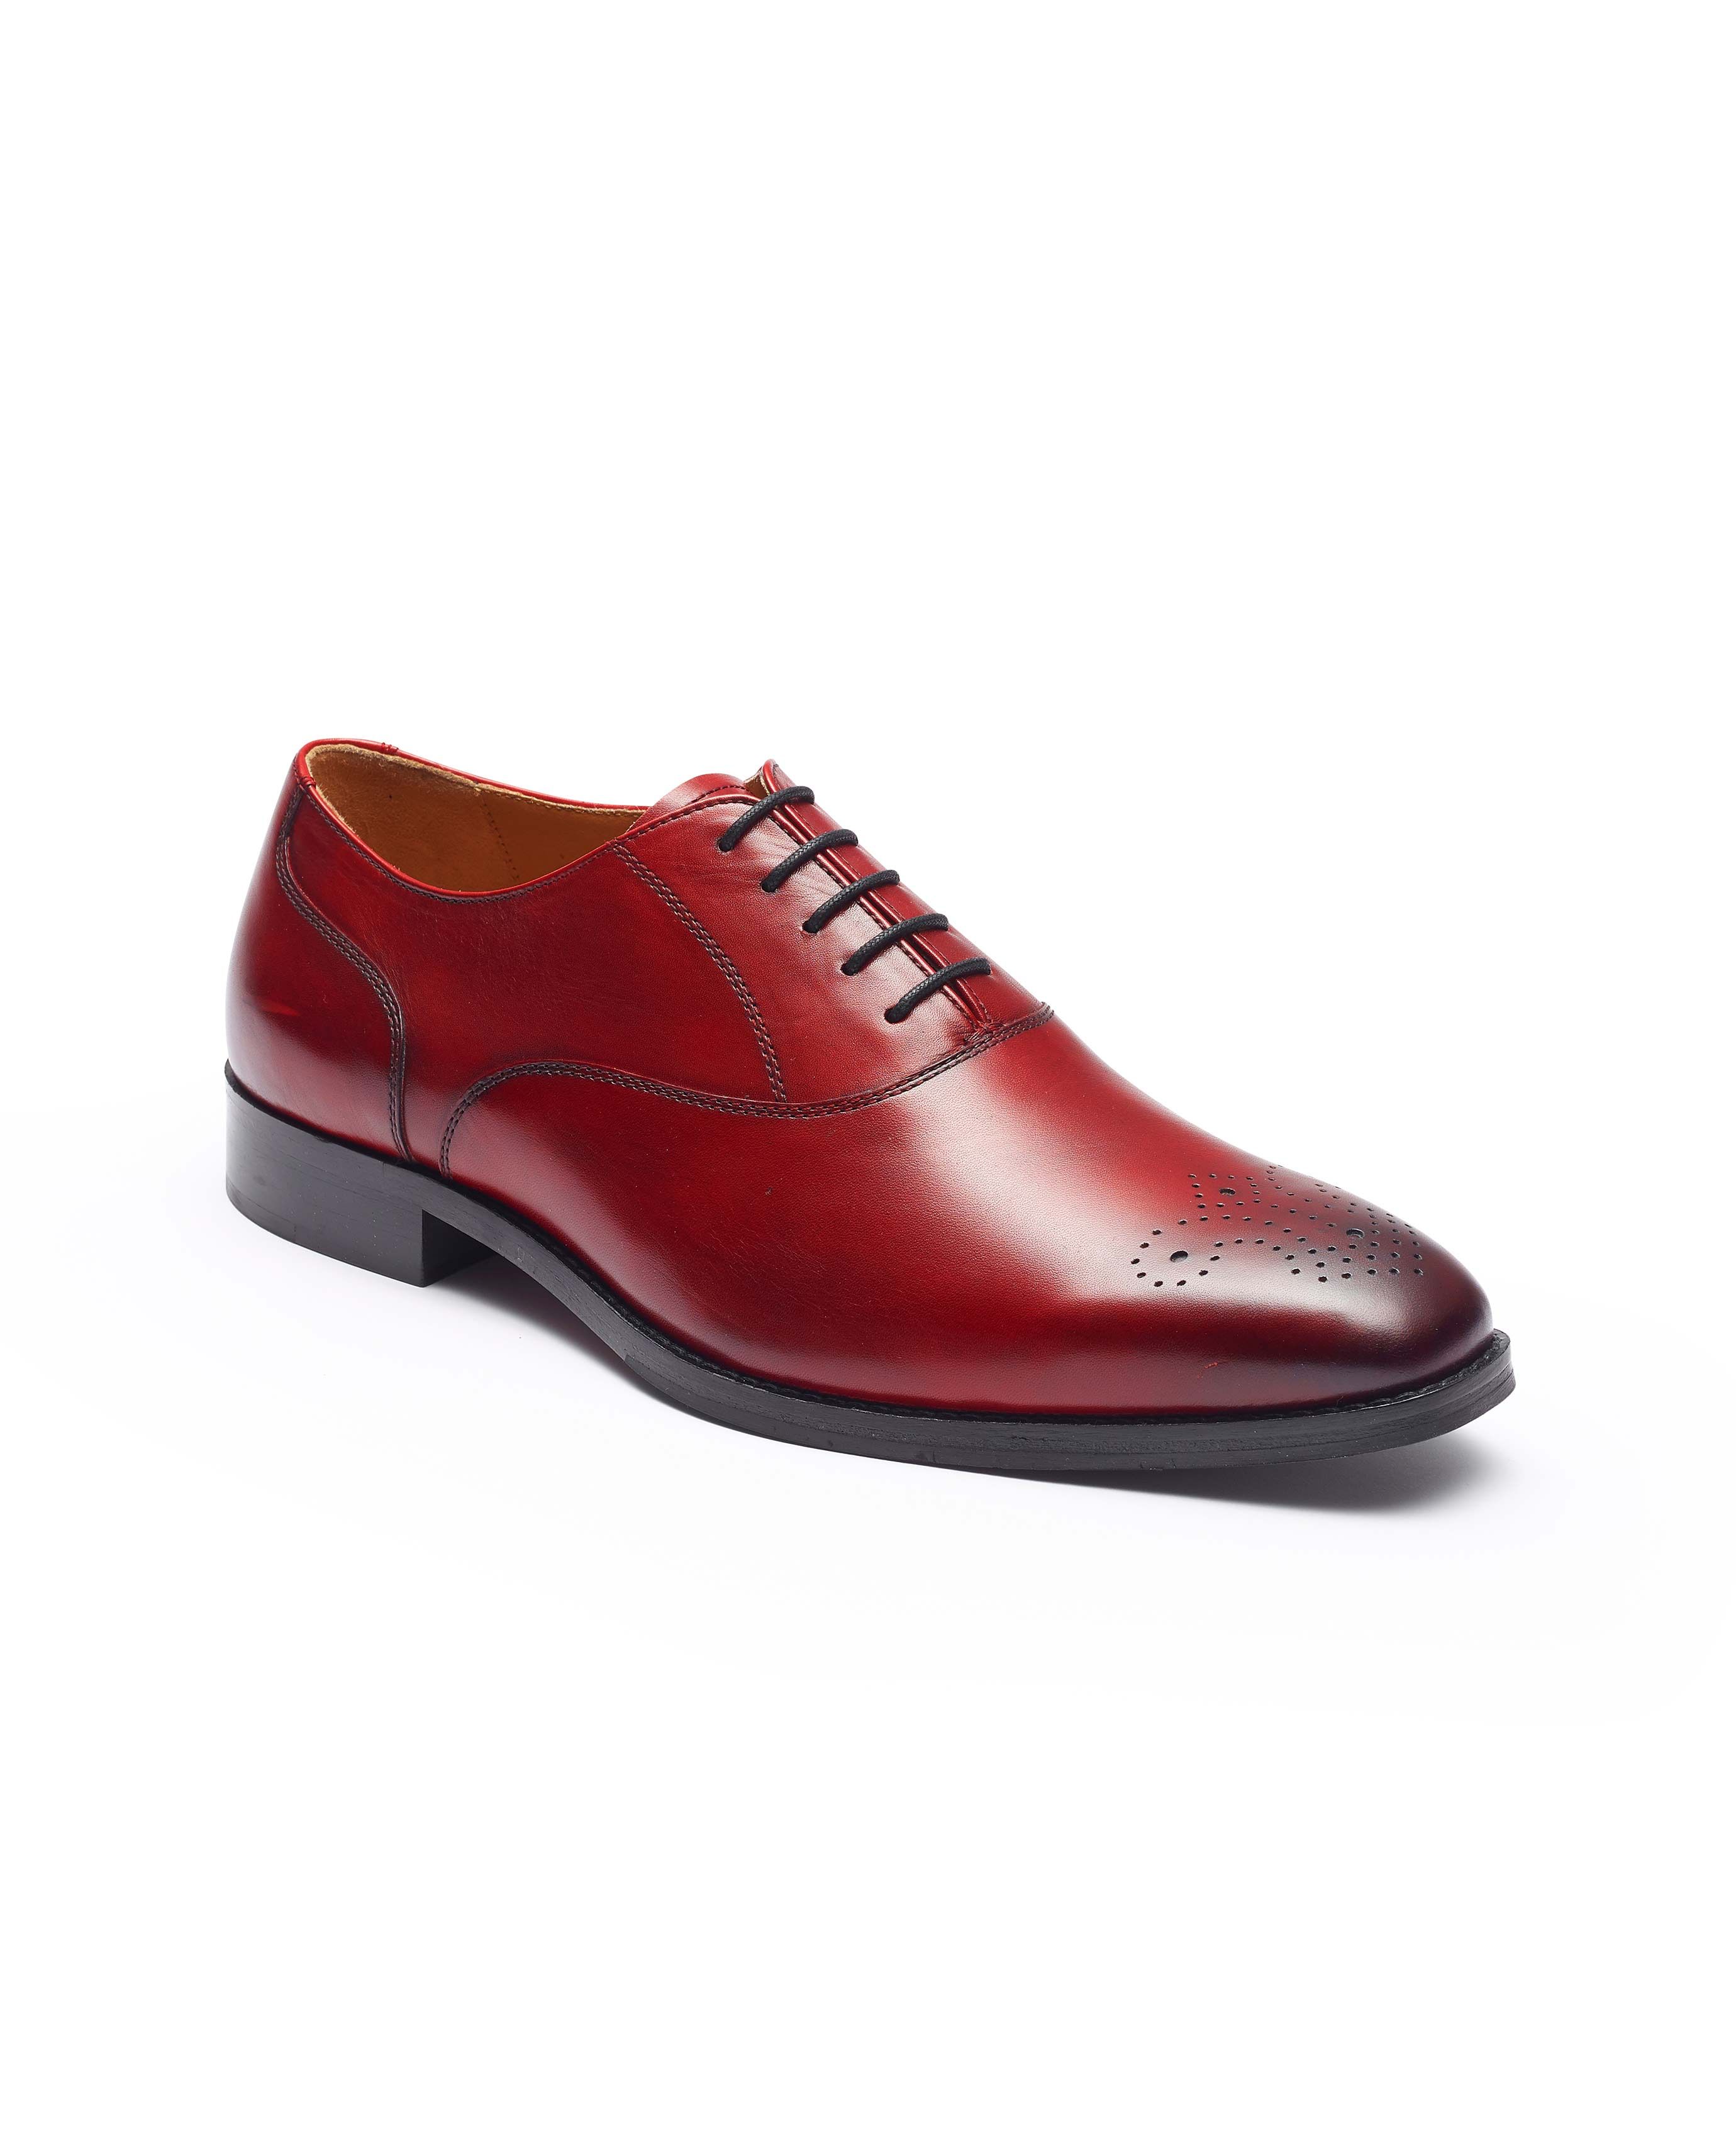 Men’s Oxblood Leather Hand-Painted Oxford Brogues | Savile Row Co